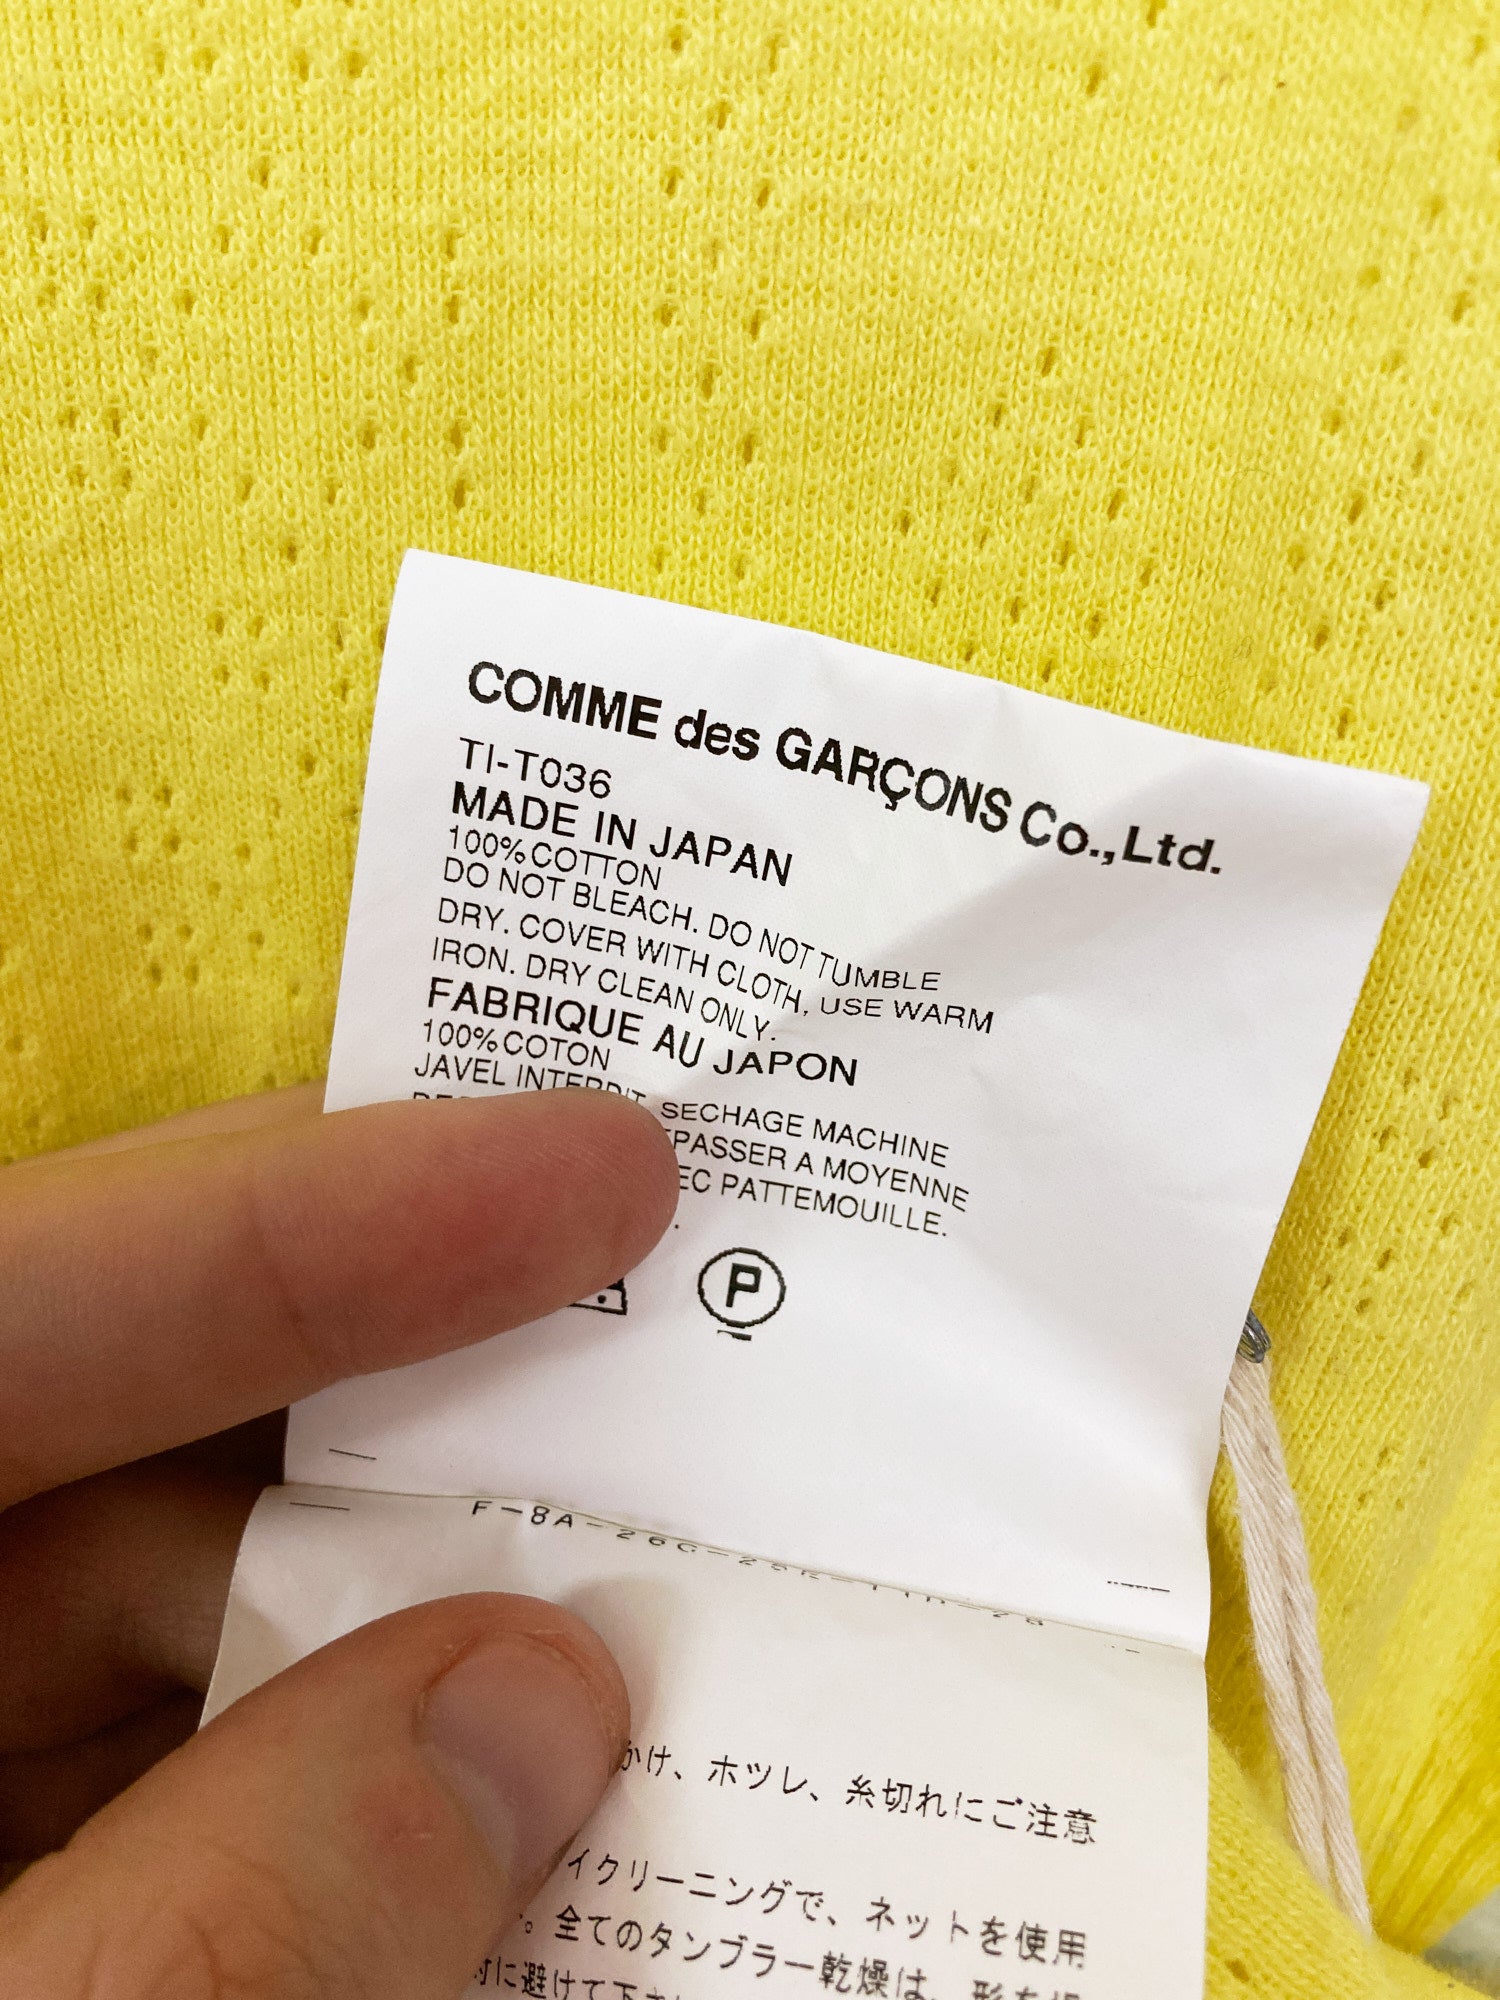 Tricot Comme des Garcons 2002 yellow cotton knit ribbed waist t-shirt